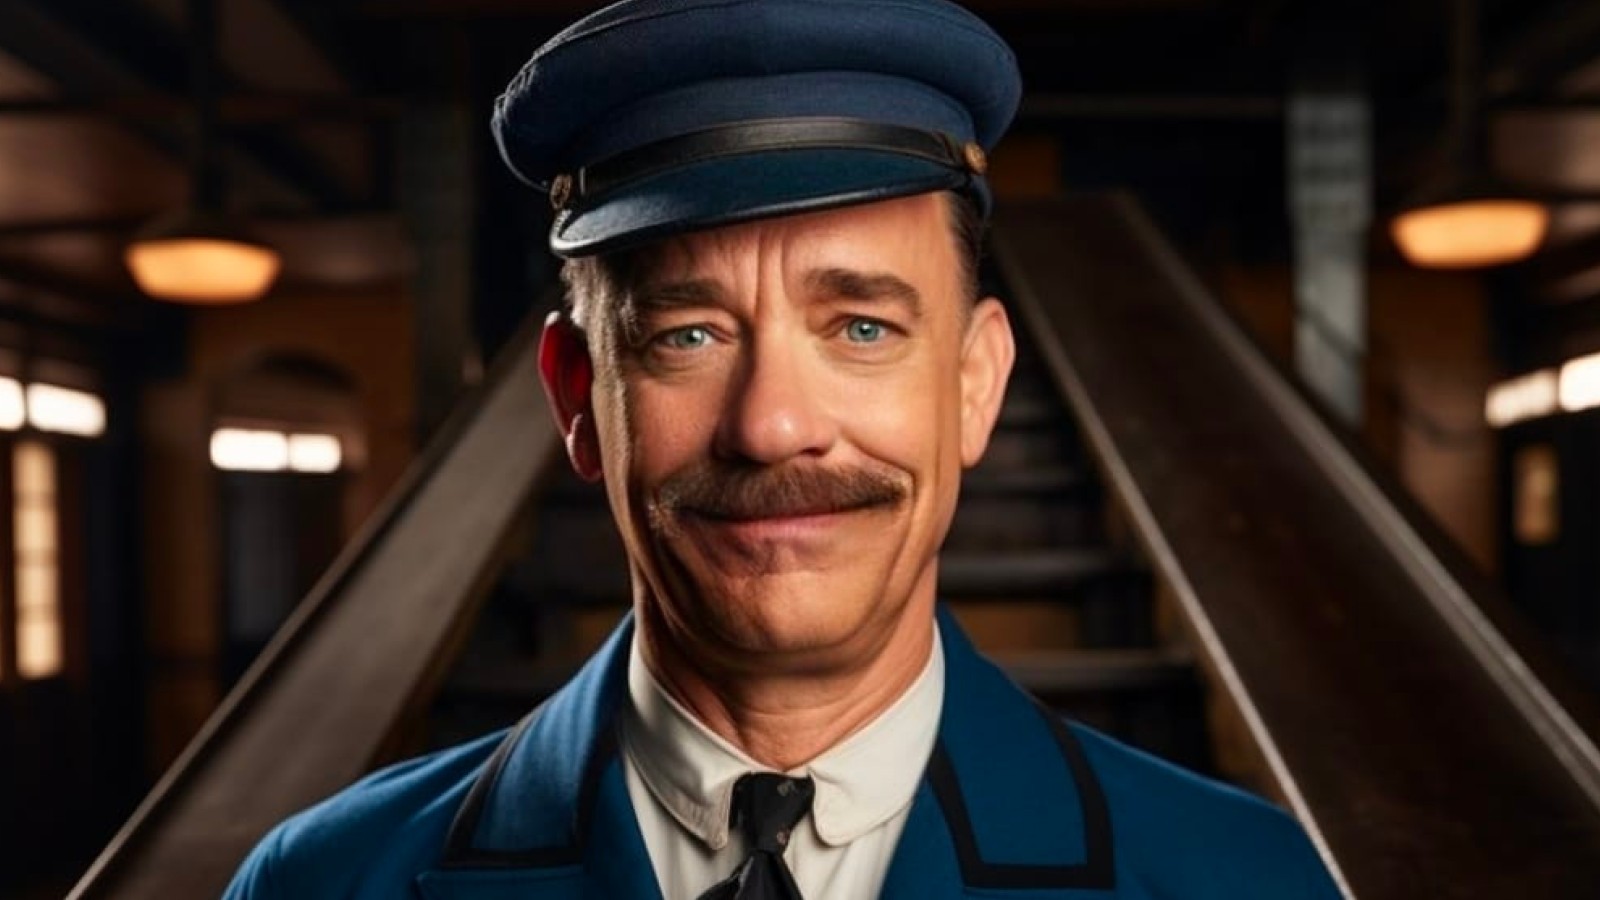 Is The Christmas Express real? Polar Express sequel explained - Dexerto